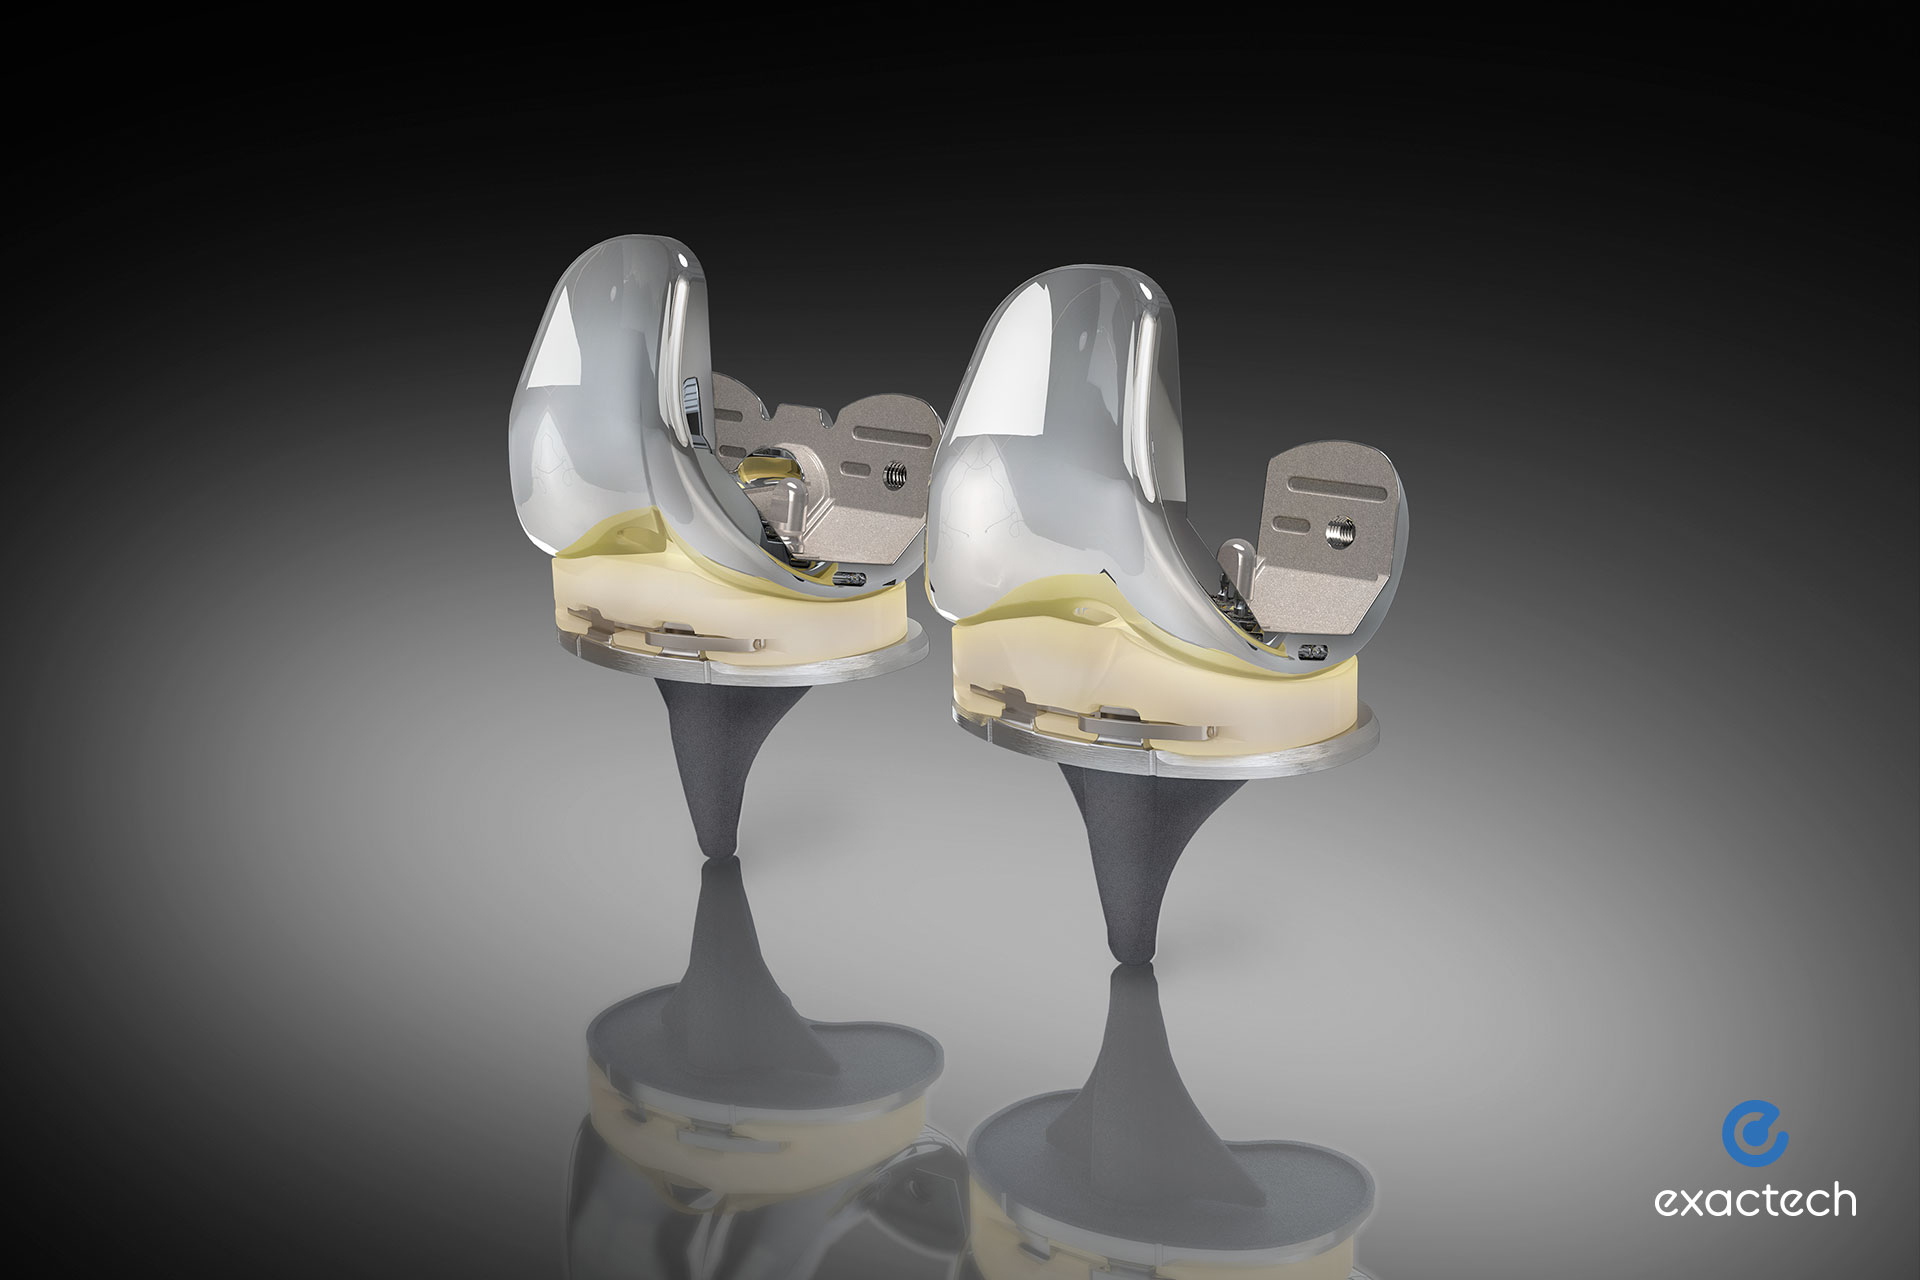 Exactech Debuts New Primary Knee System: TriVerse™ | Business Wire